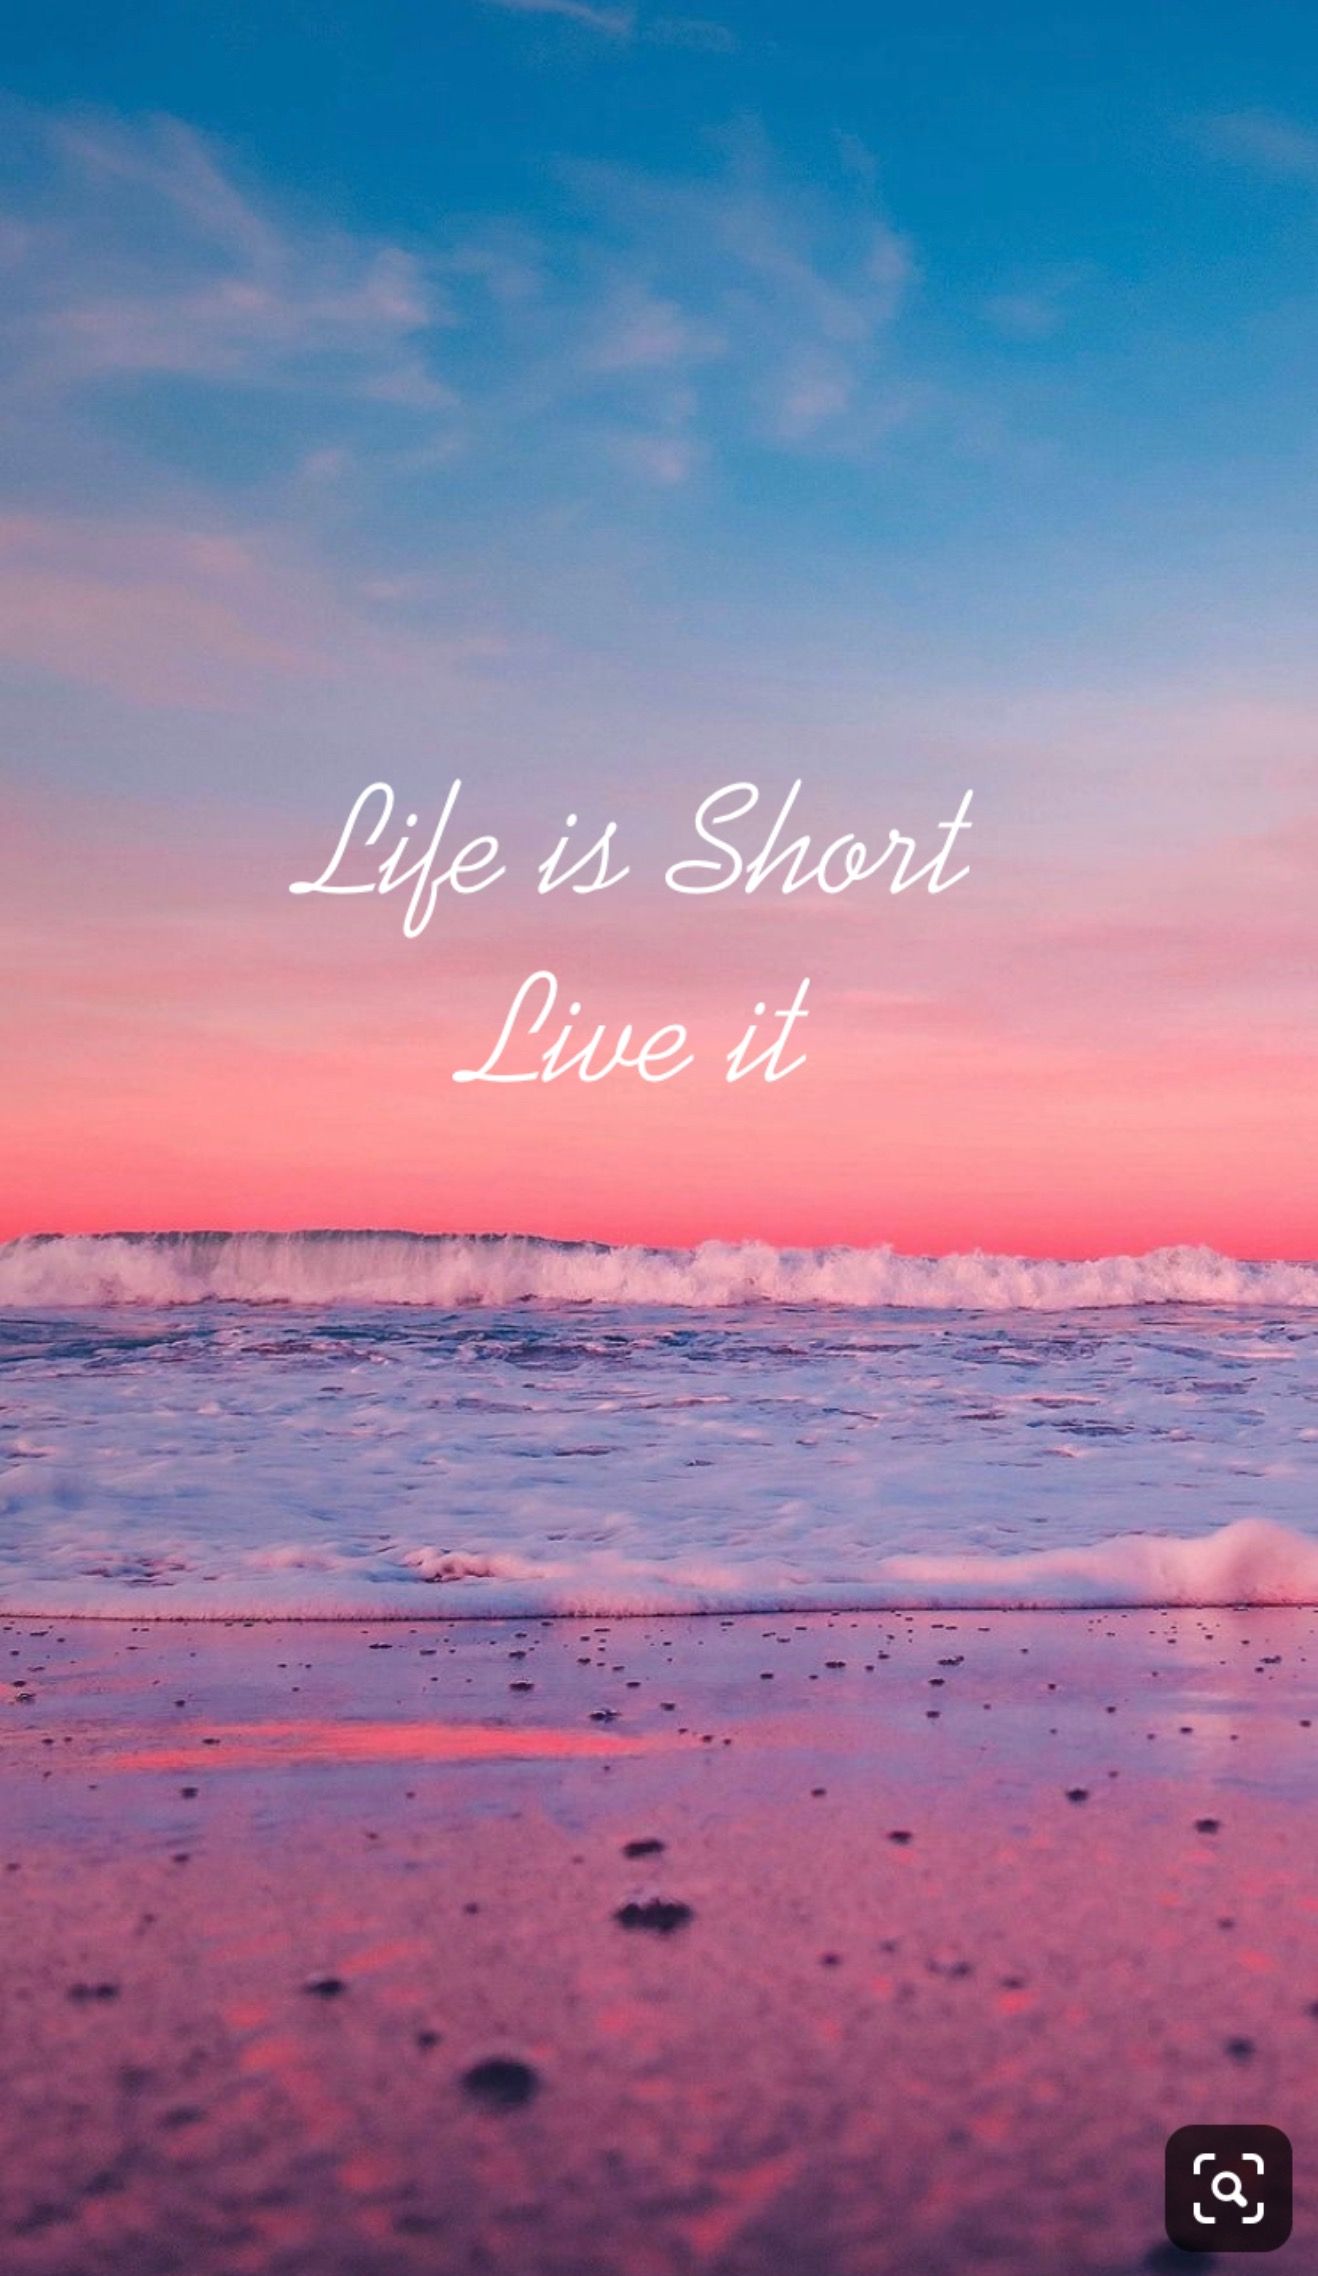 Inspirational Quote. Life is too short quotes, Inspirational quotes wallpaper, Cute short quotes